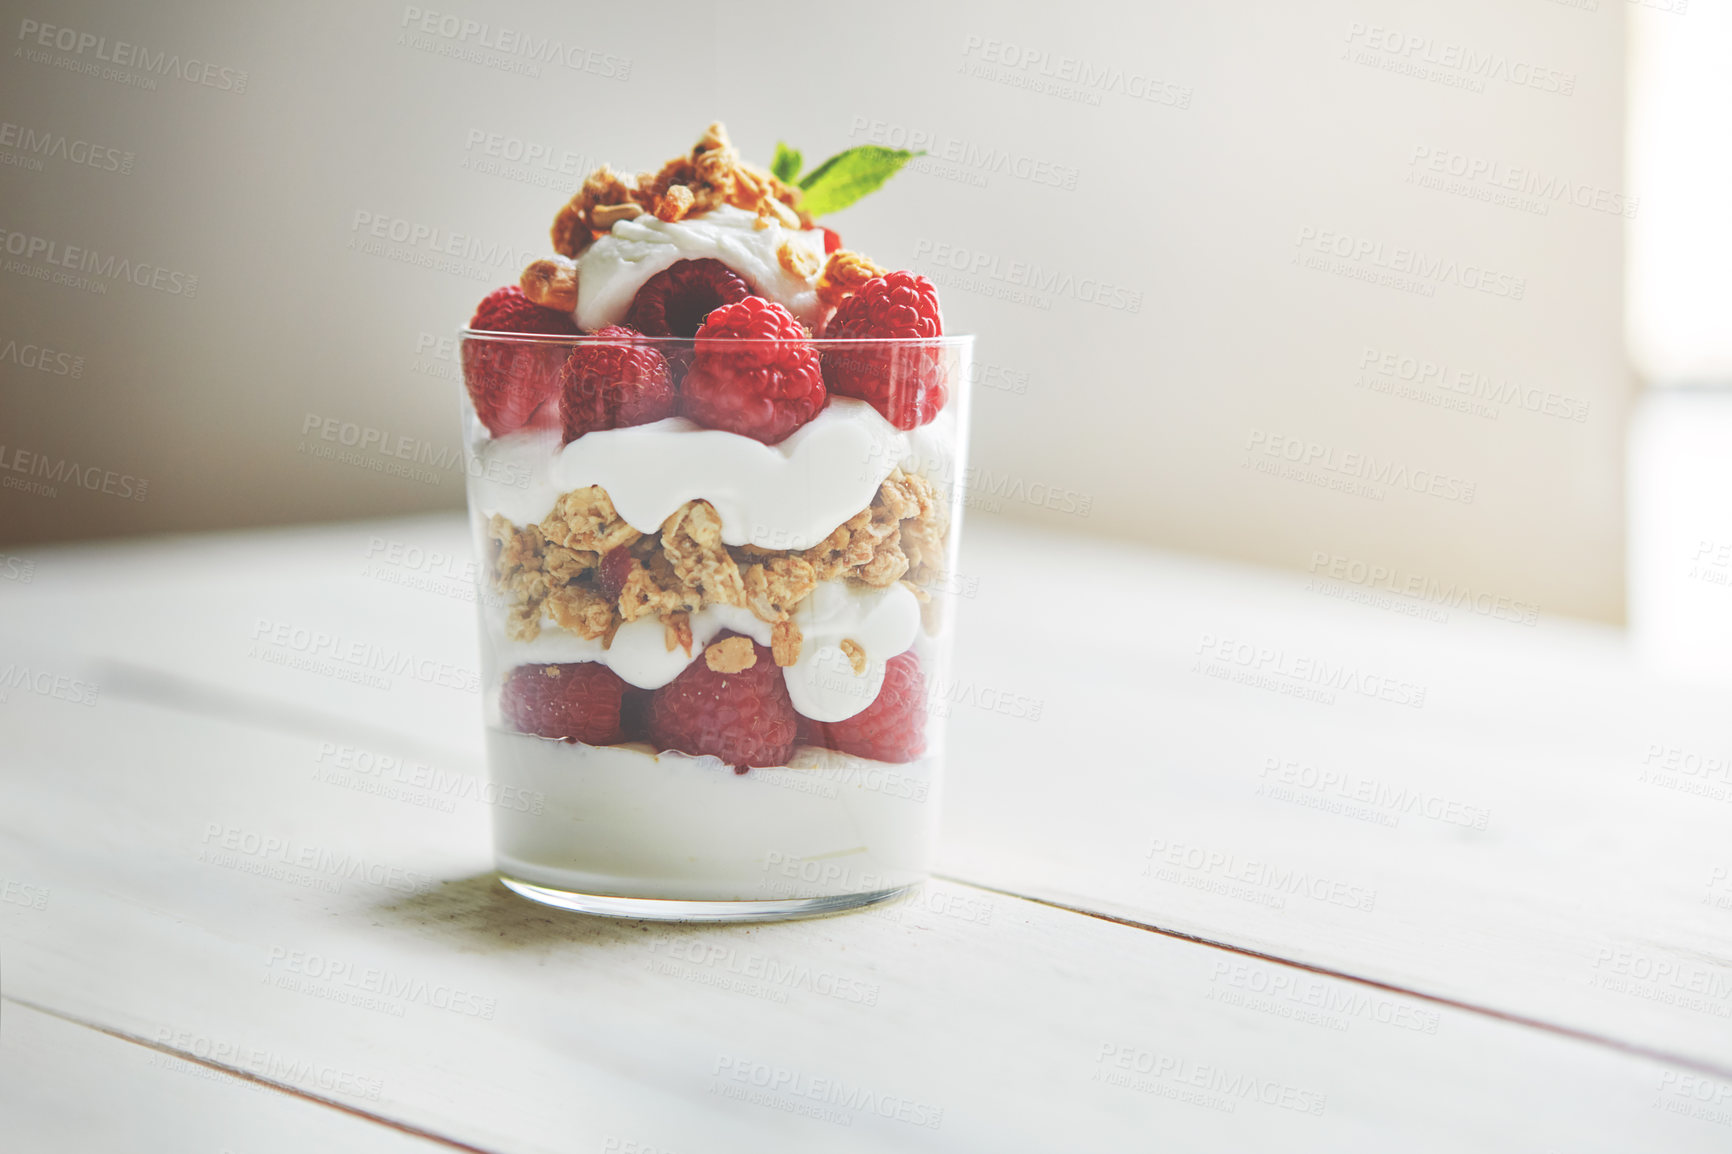 Buy stock photo Shot of granola, yoghurt and berries in a glass